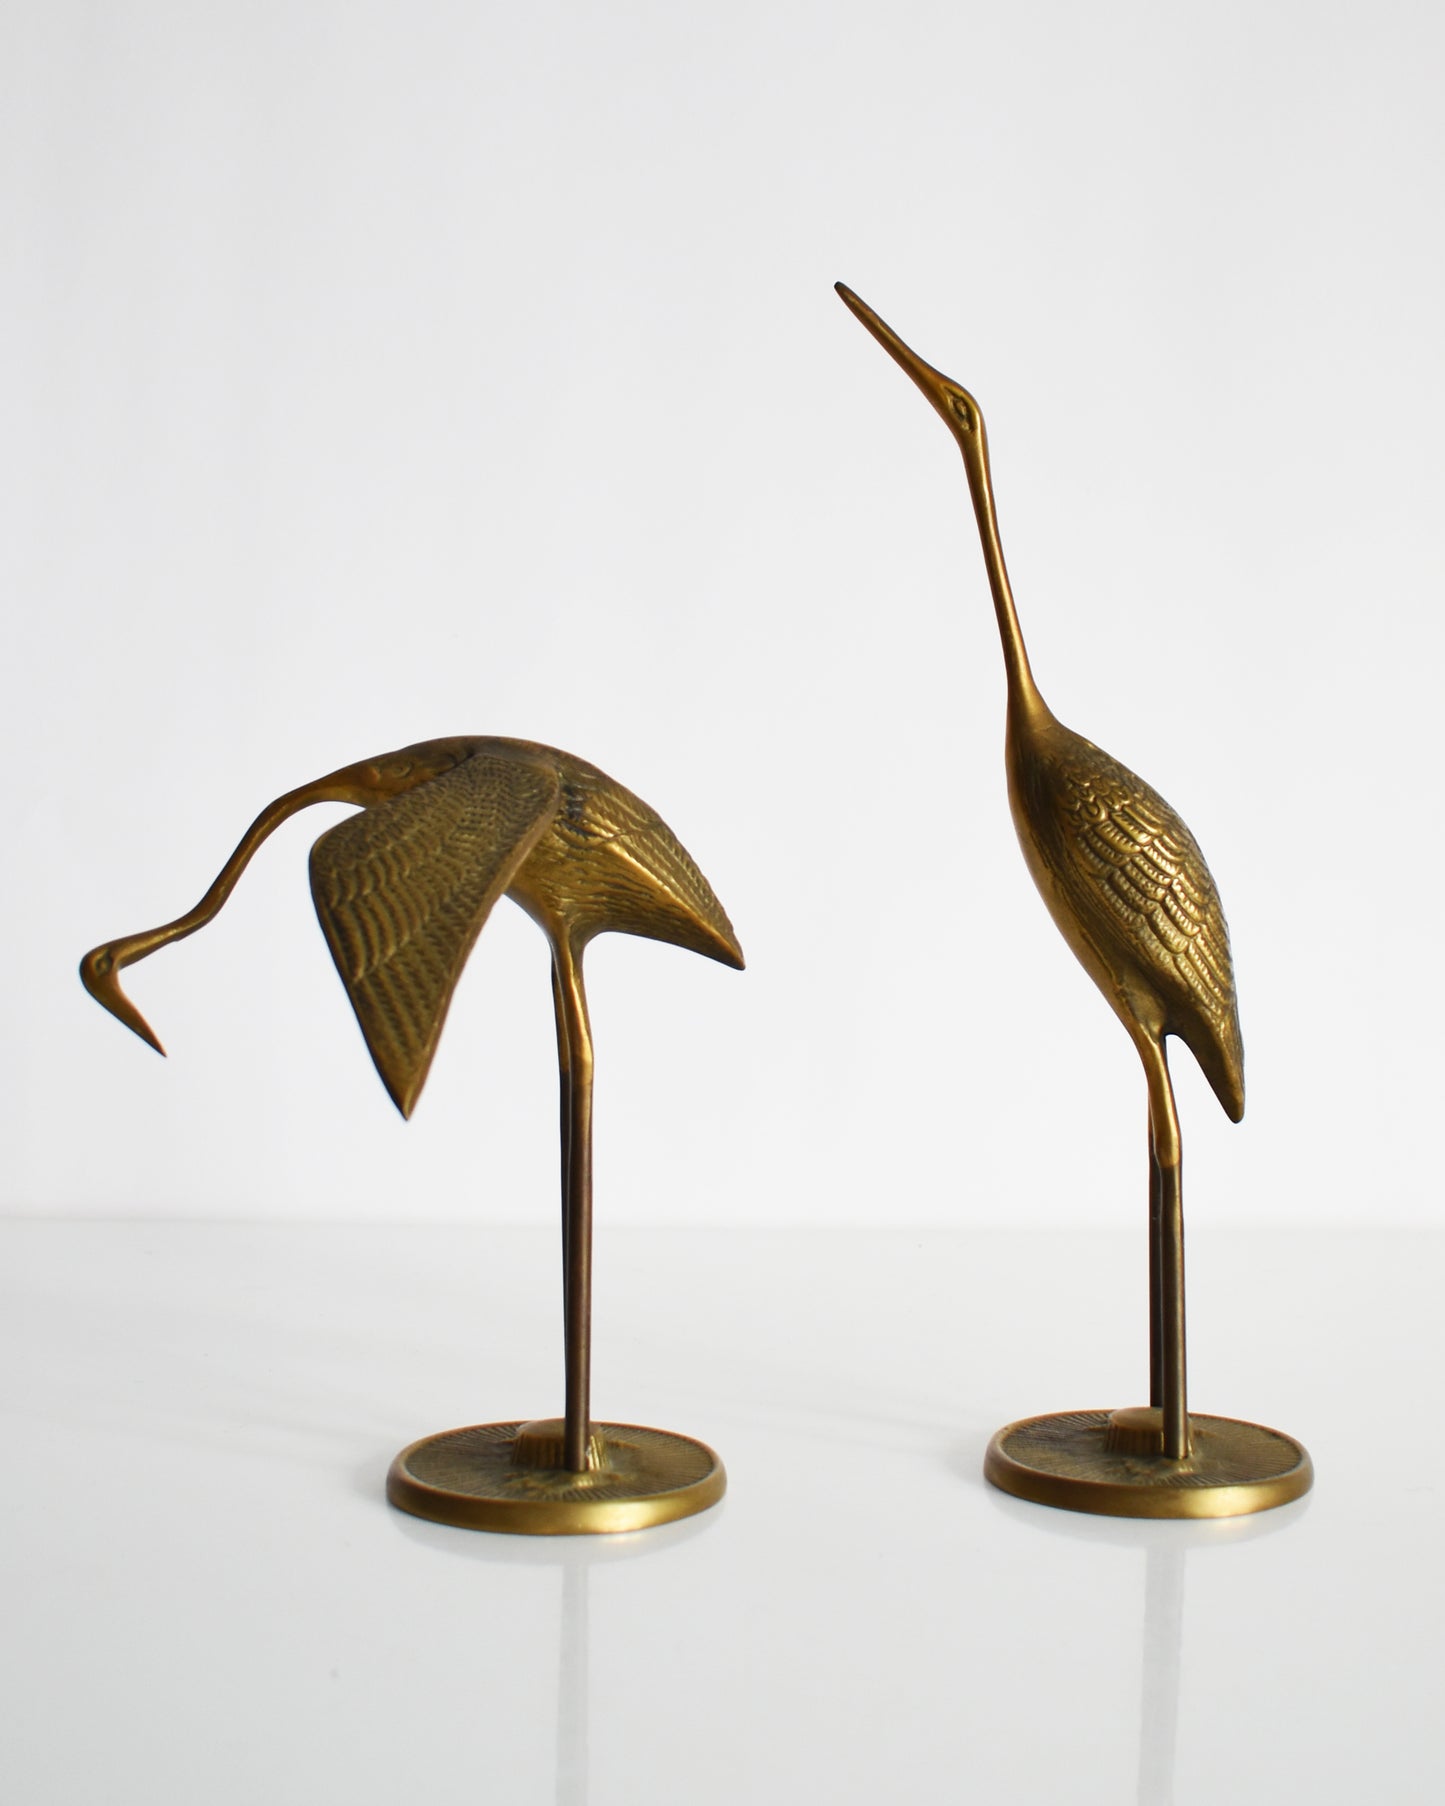 Side view of a  pair of vintage brass cranes that have ornate carved detail on their wings and body.